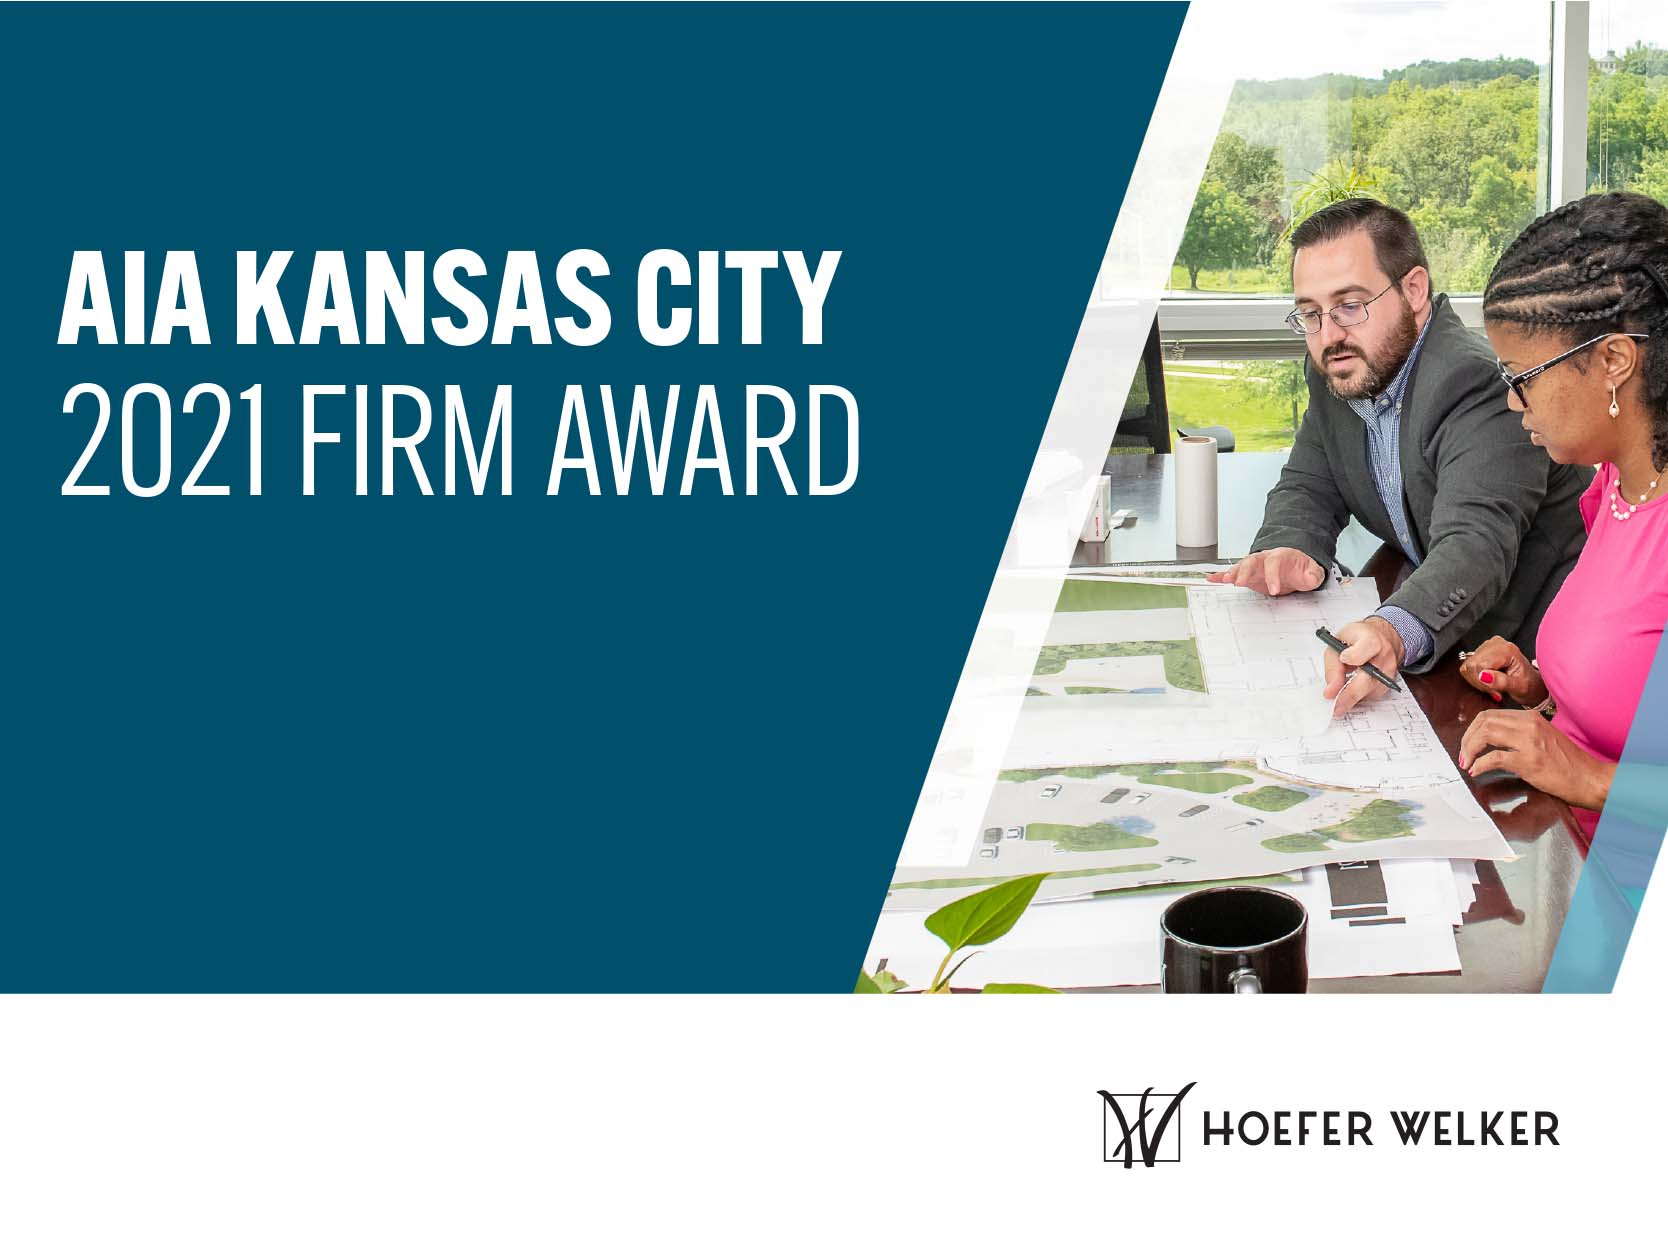 AIA Kansas City selects Hoefer Welker to receive Firm Award